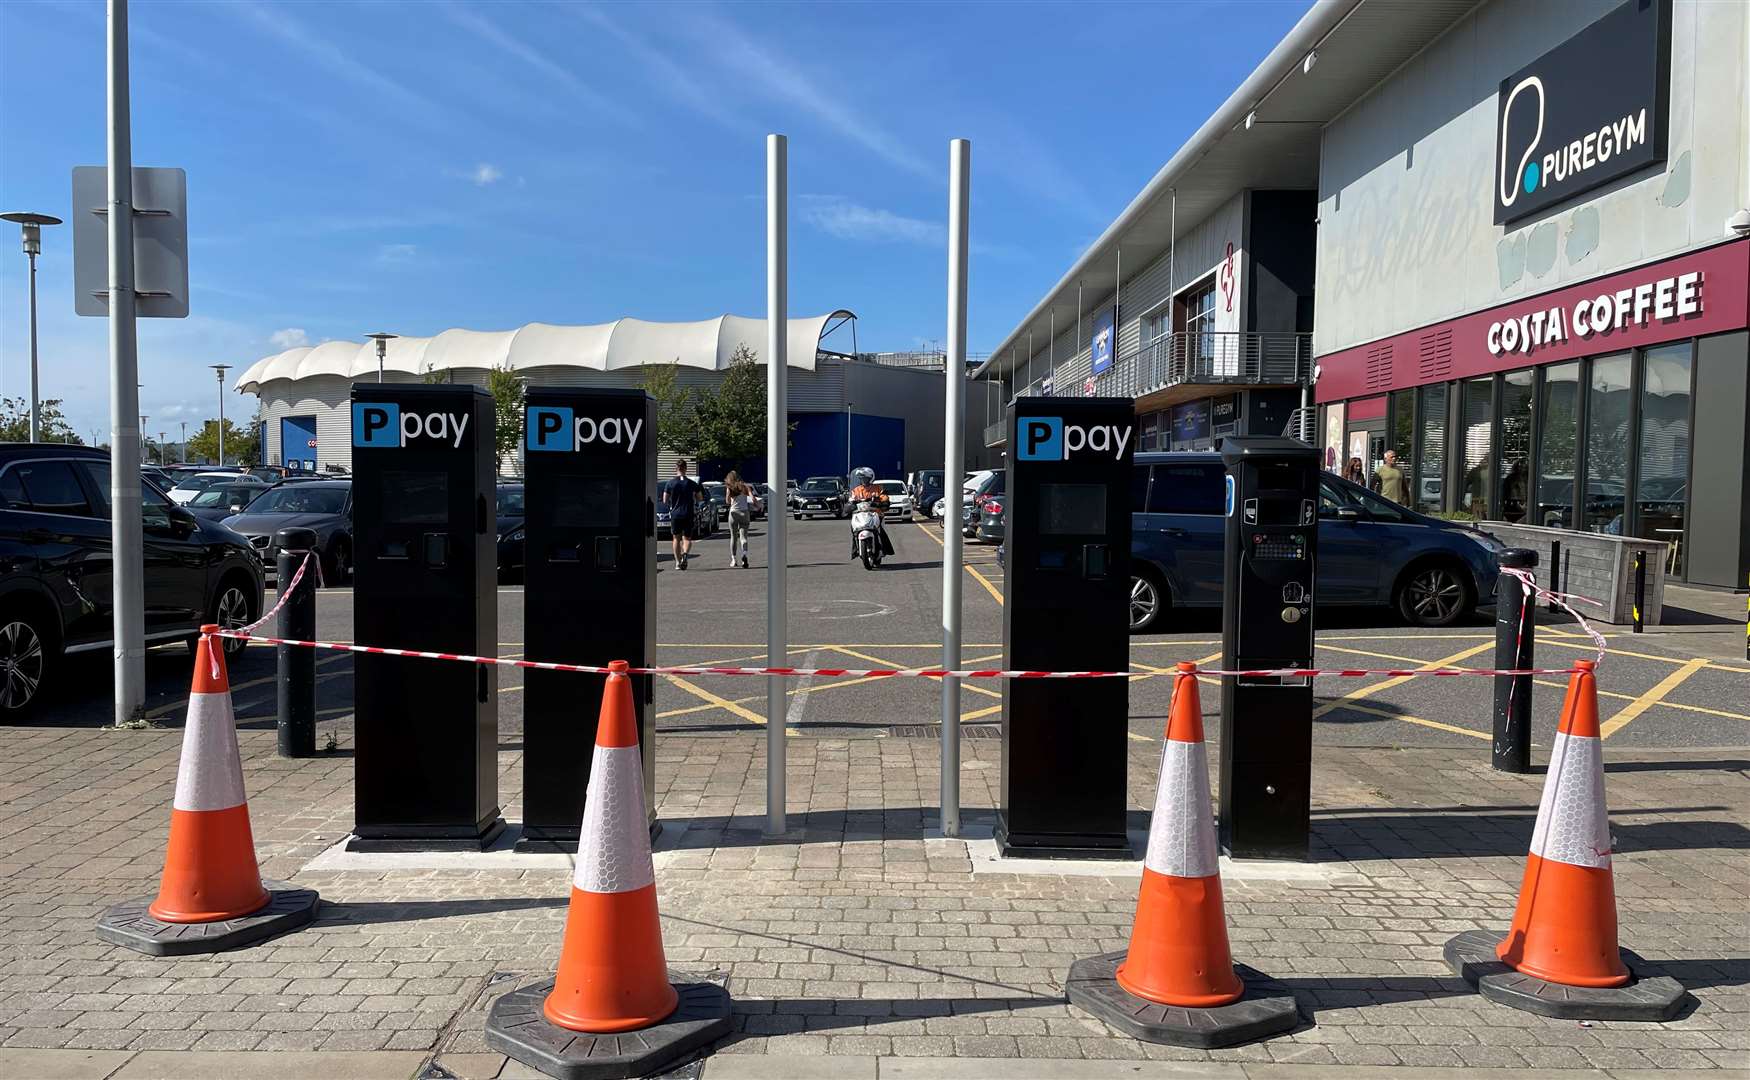 New parking charges at Dockside Outlet Centre